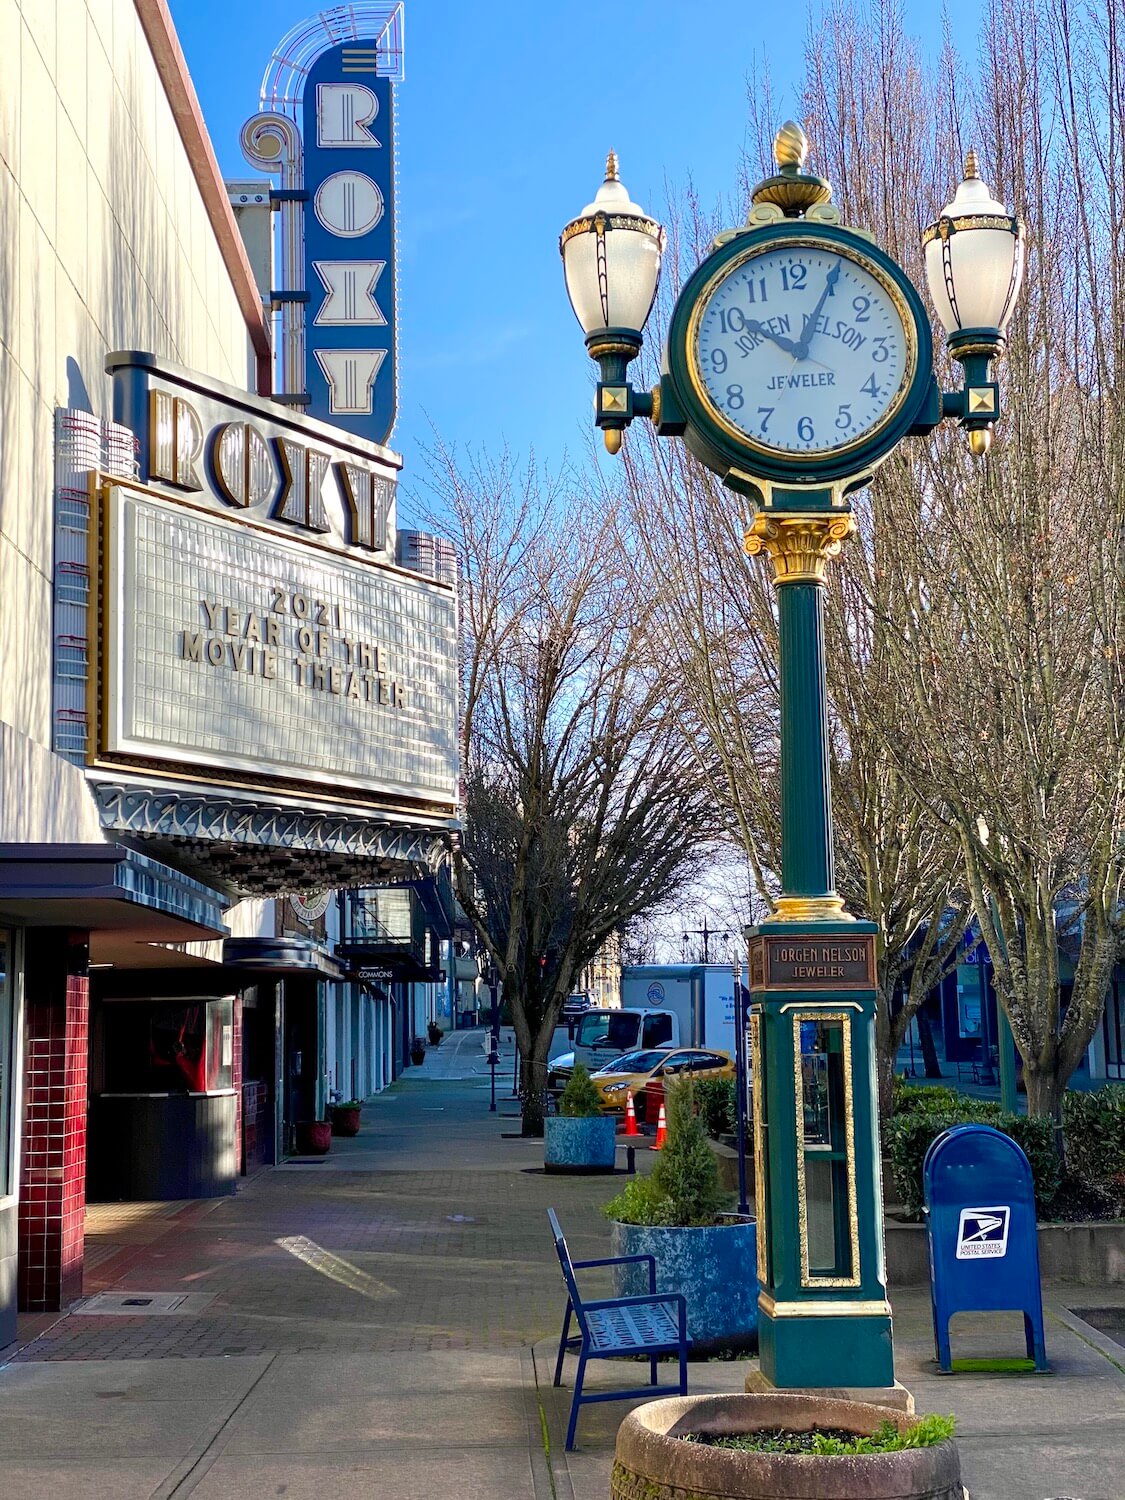 A scene in Downtown Bremerton Washington shows the Roxy movie theatre with a blue and white neon sign and an ornate sidewalk clock.  Along the sidewalk is a US Postal Service blue mailbox and the sky above is blue.